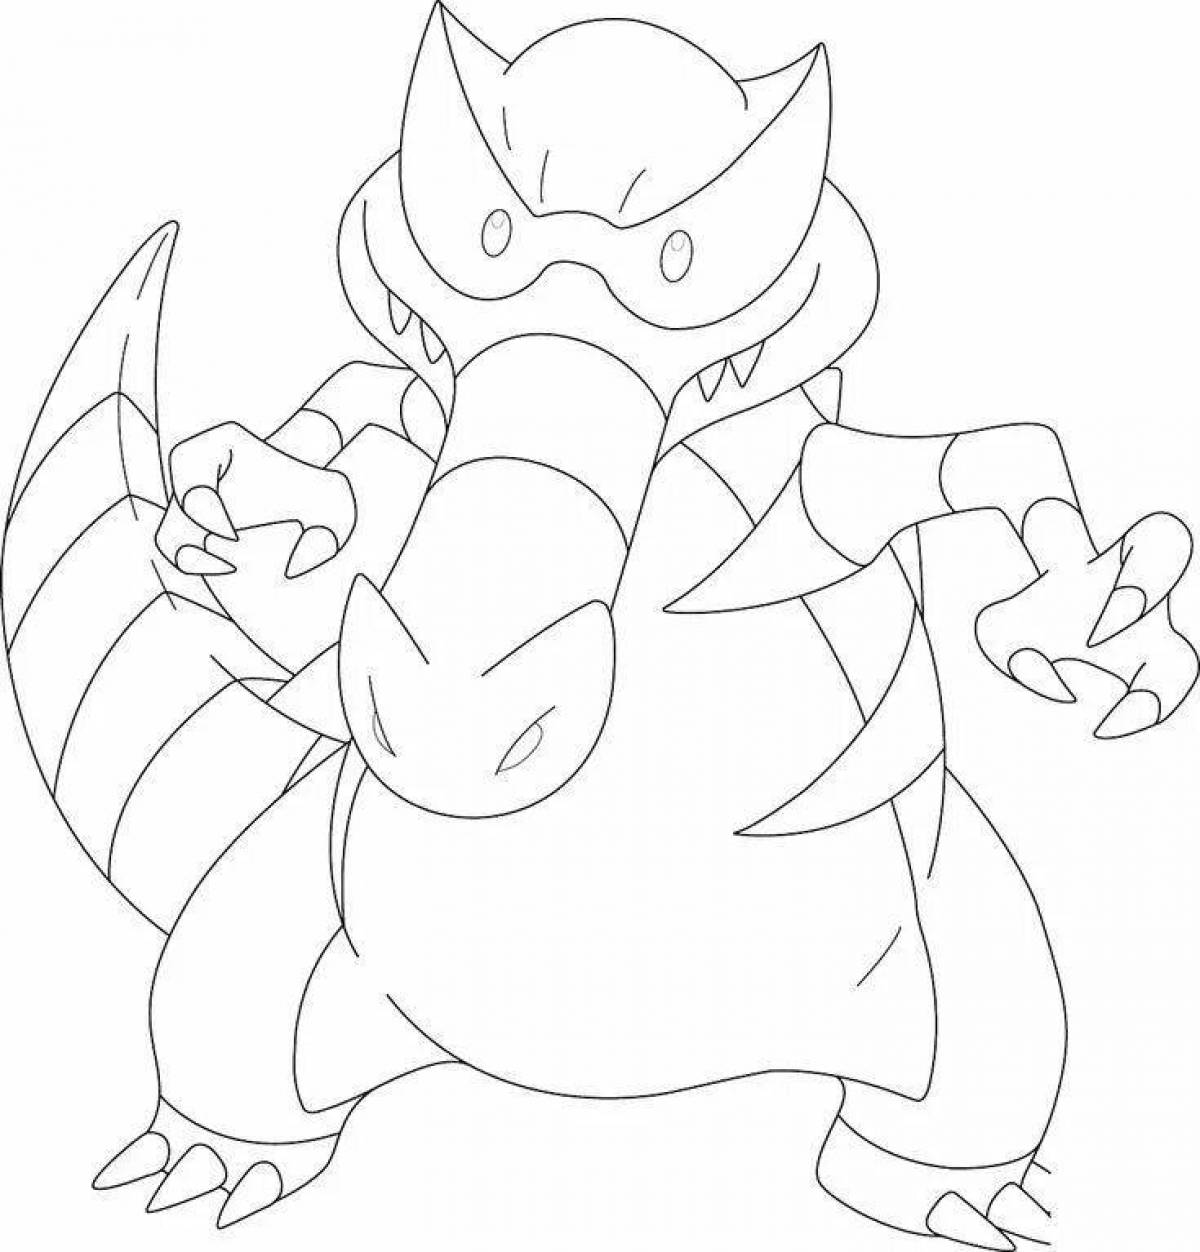 Goojitzu coloring page coloring page